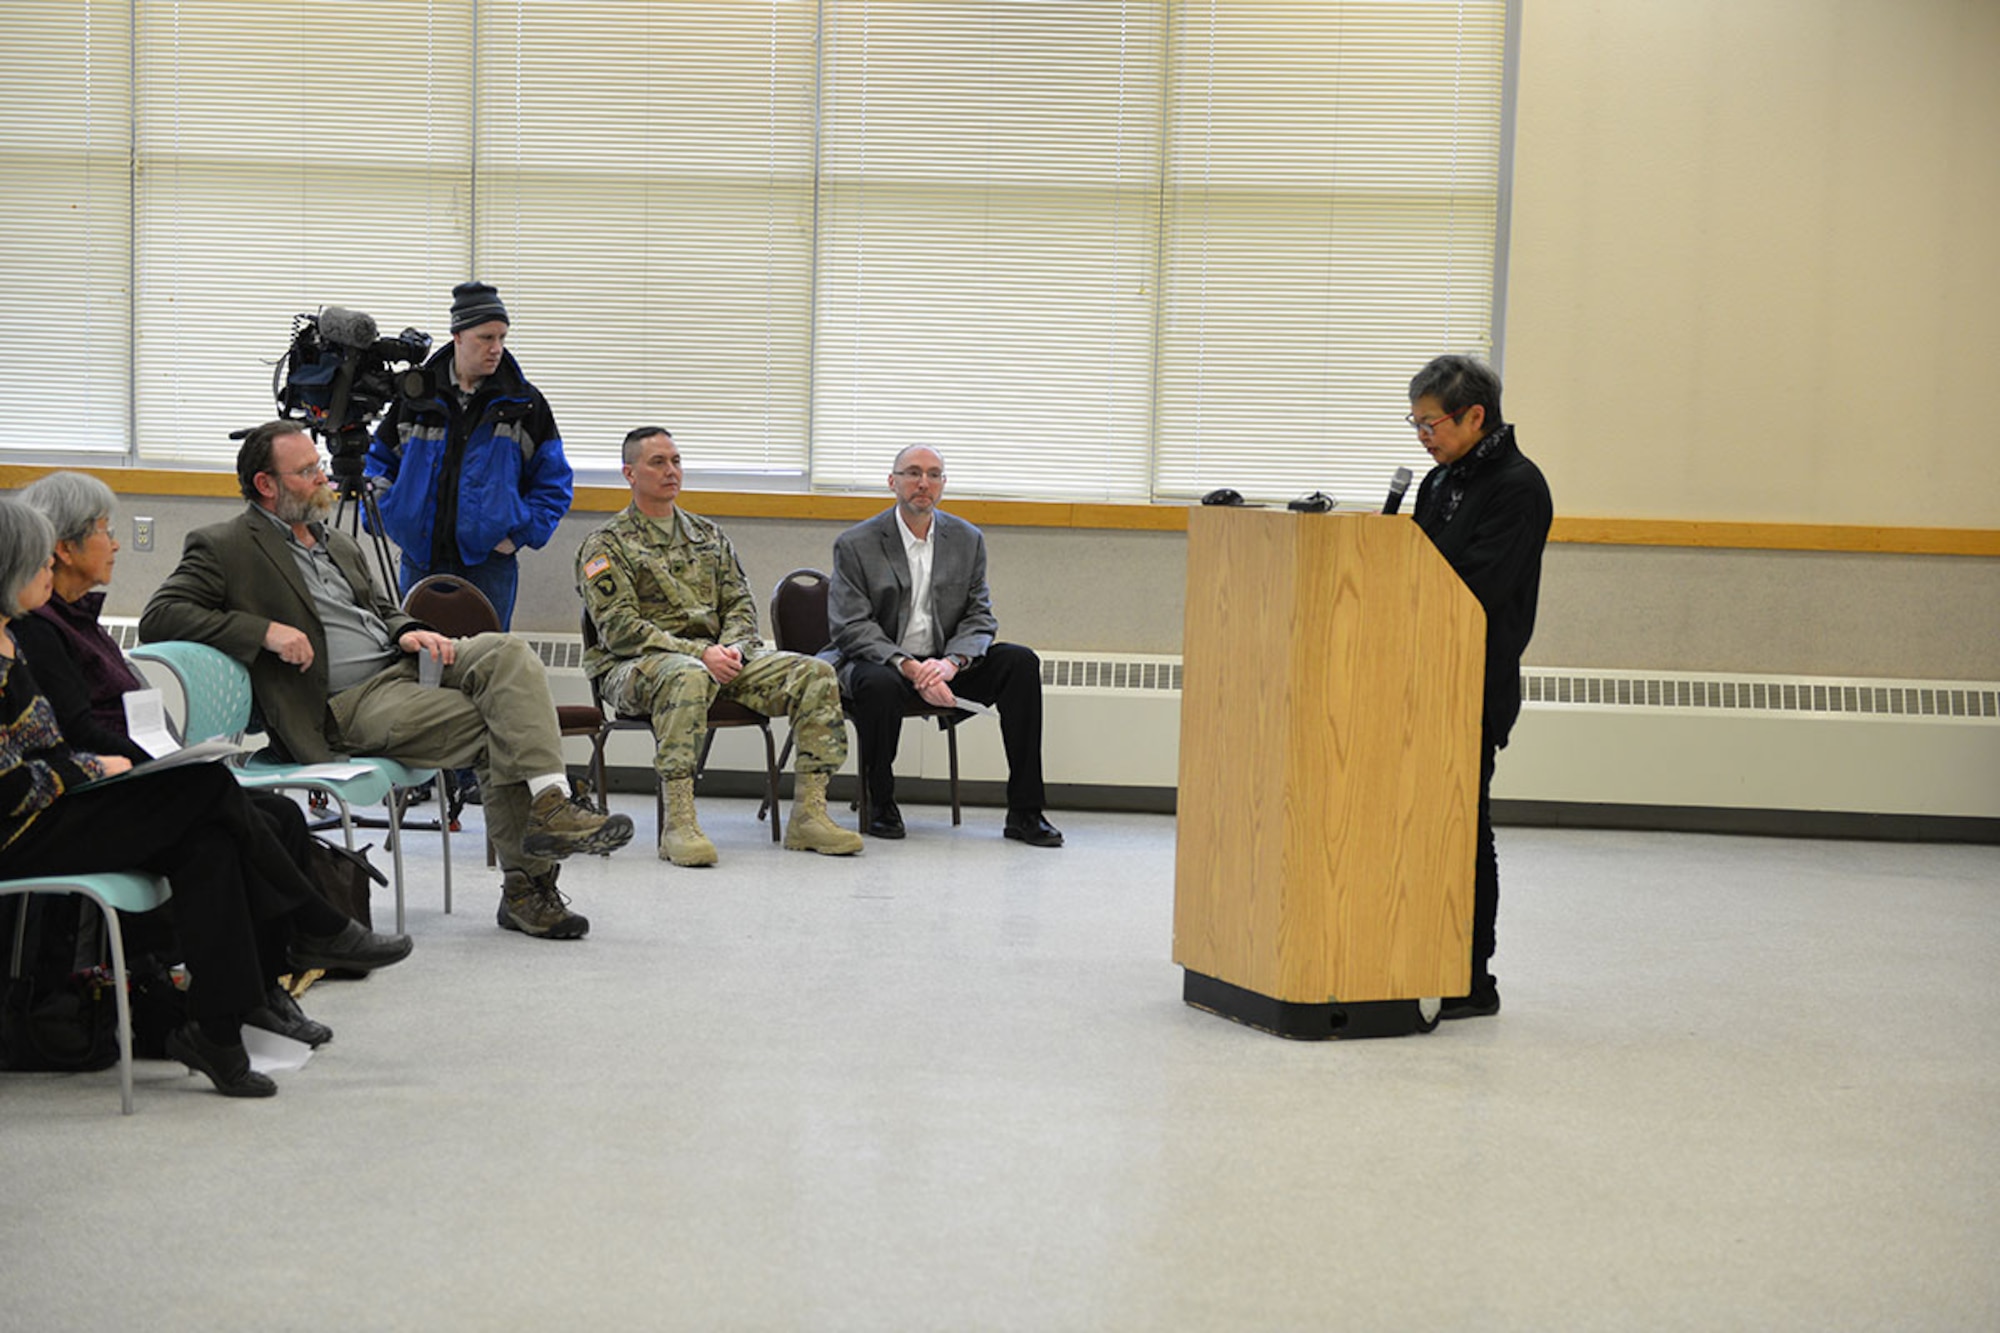 Mary Abo, daughter of John Tanaka, who was arrested and interned out of Juneau, Alaska, shares her childhood memories at Joint Base Elmendorf-Richardson's Day of Remembrance ceremony, Feb. 19 at the Army Reserve Center. The ceremony highlighted findings on JBER-Richardson's internment camp and was held in honor of the men, women, and children of Japanese descent who were interned by the U.S. during World War II. (U.S. Air Force photo by Airman 1st Class Kyle Johnson)